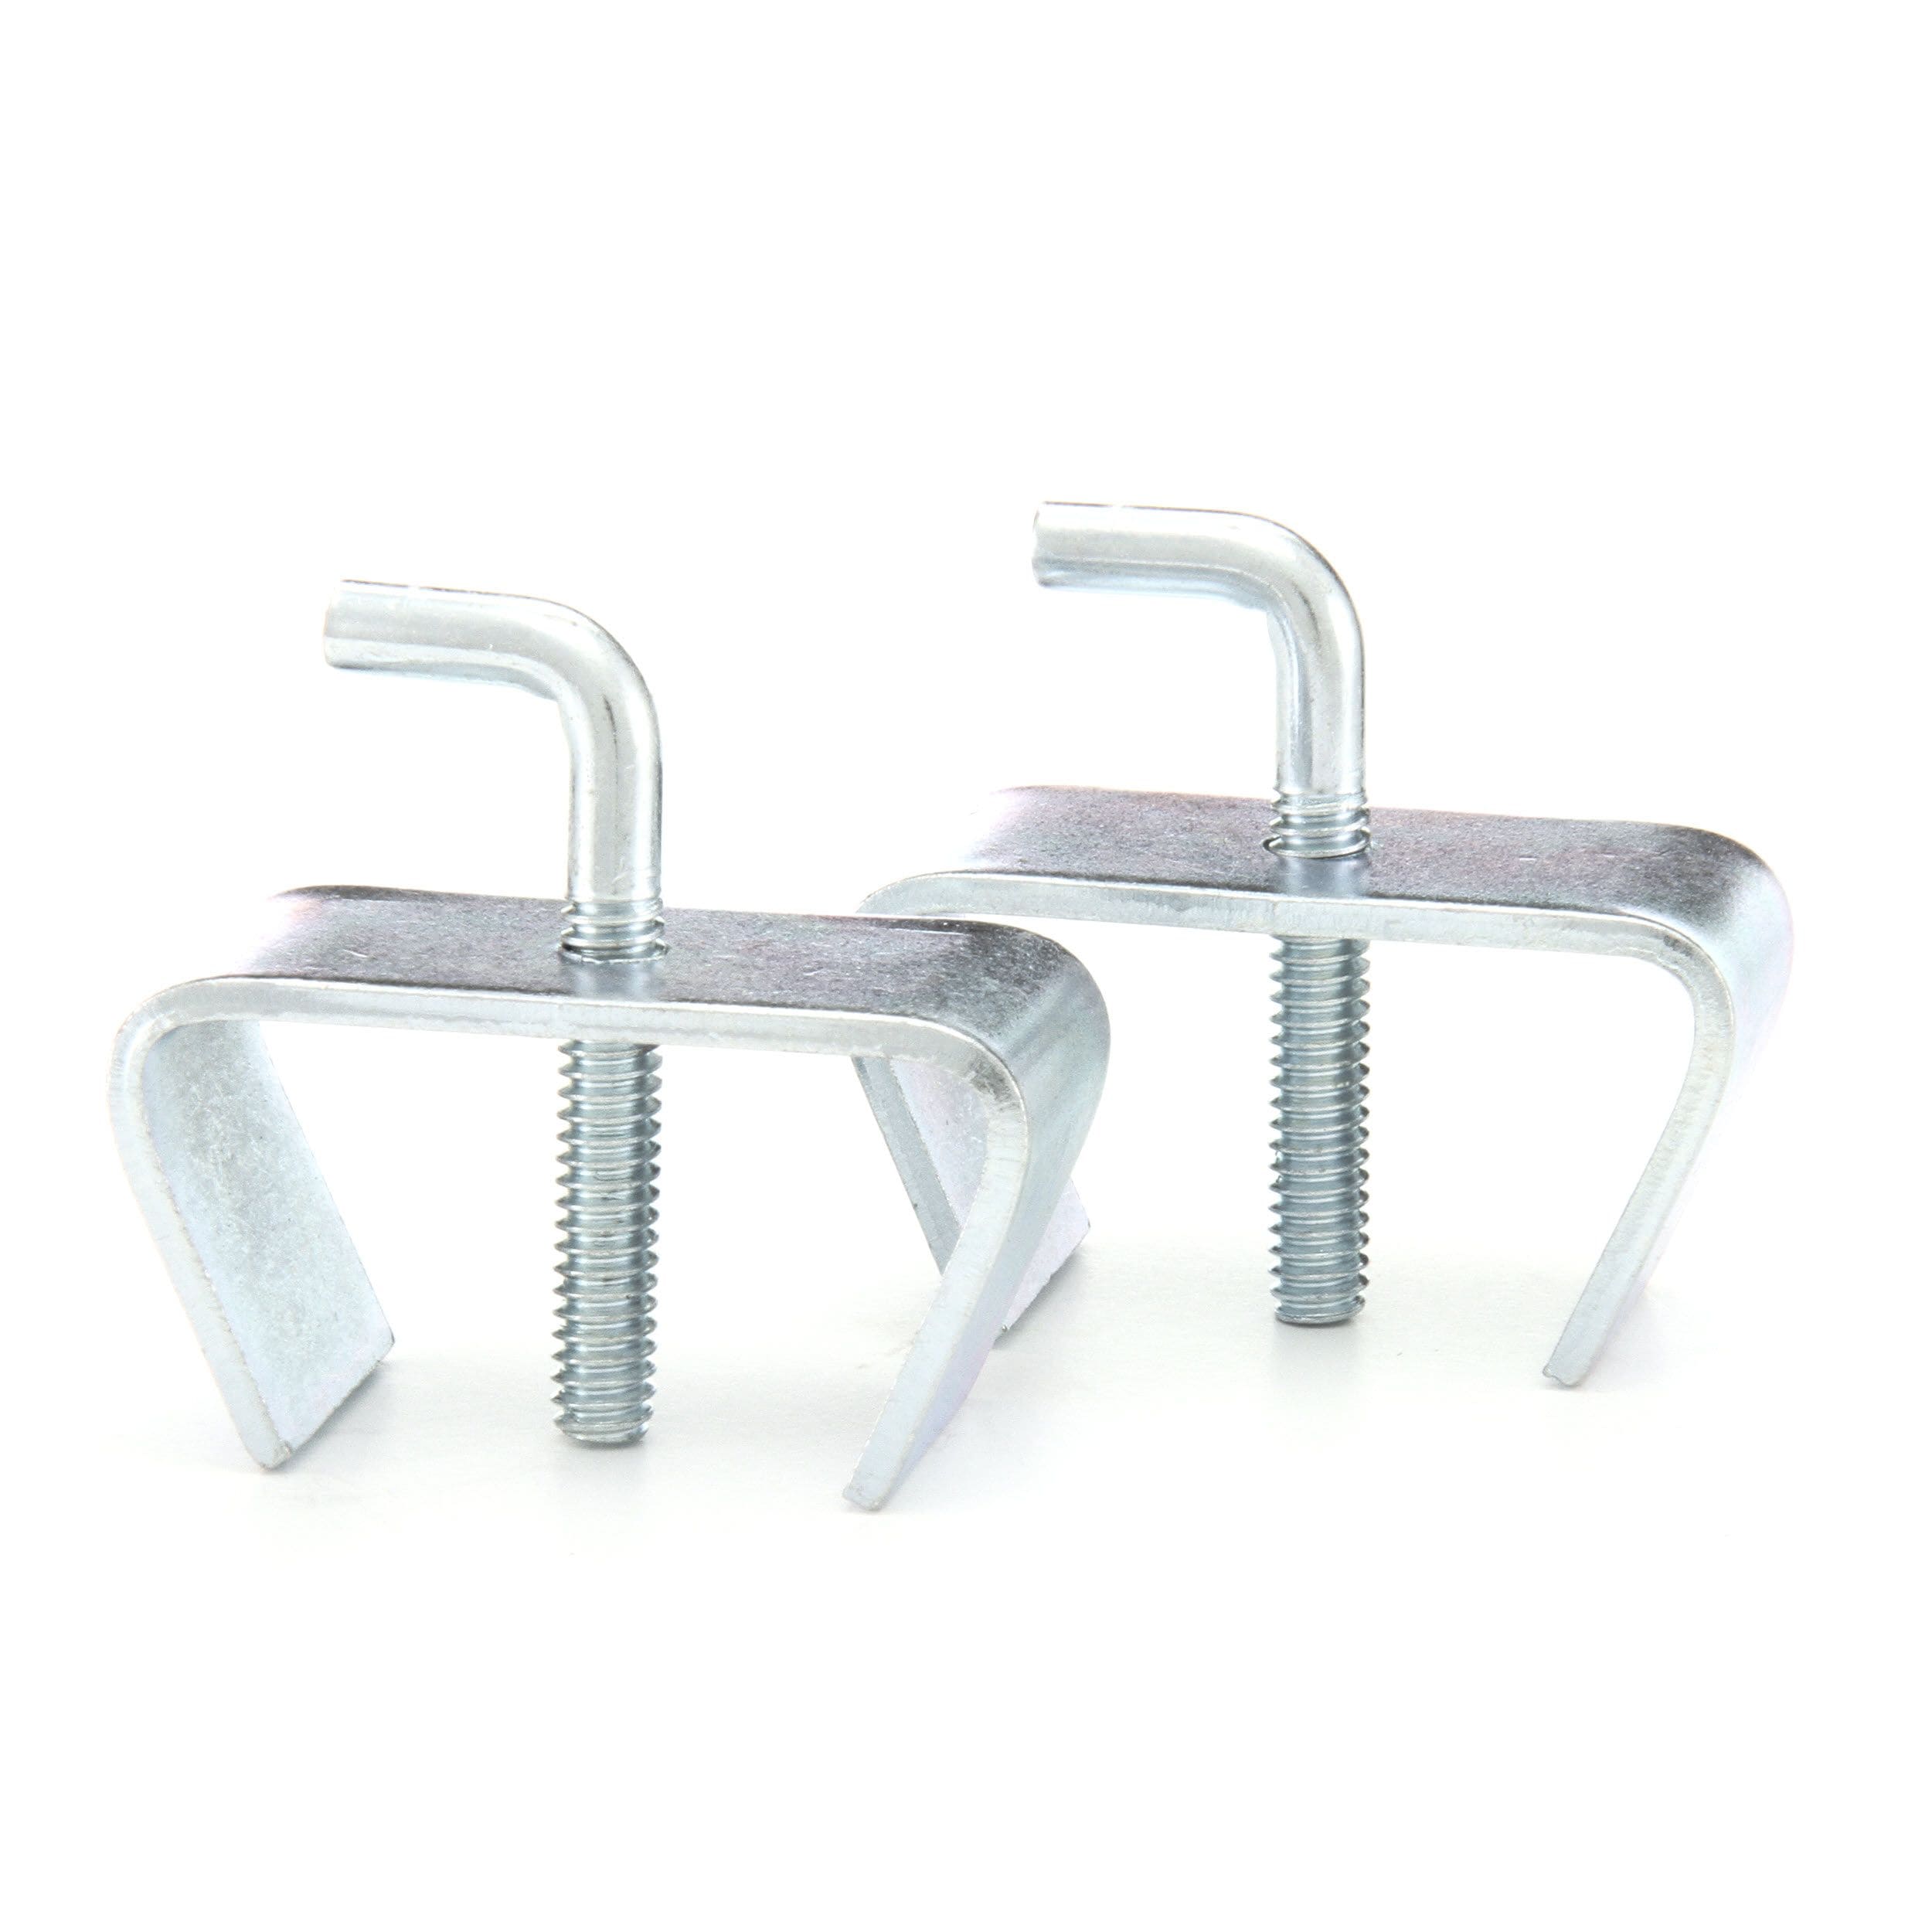 Small Slide-Co 241947 Bed Frame Rail Clamp with 1 Frame 